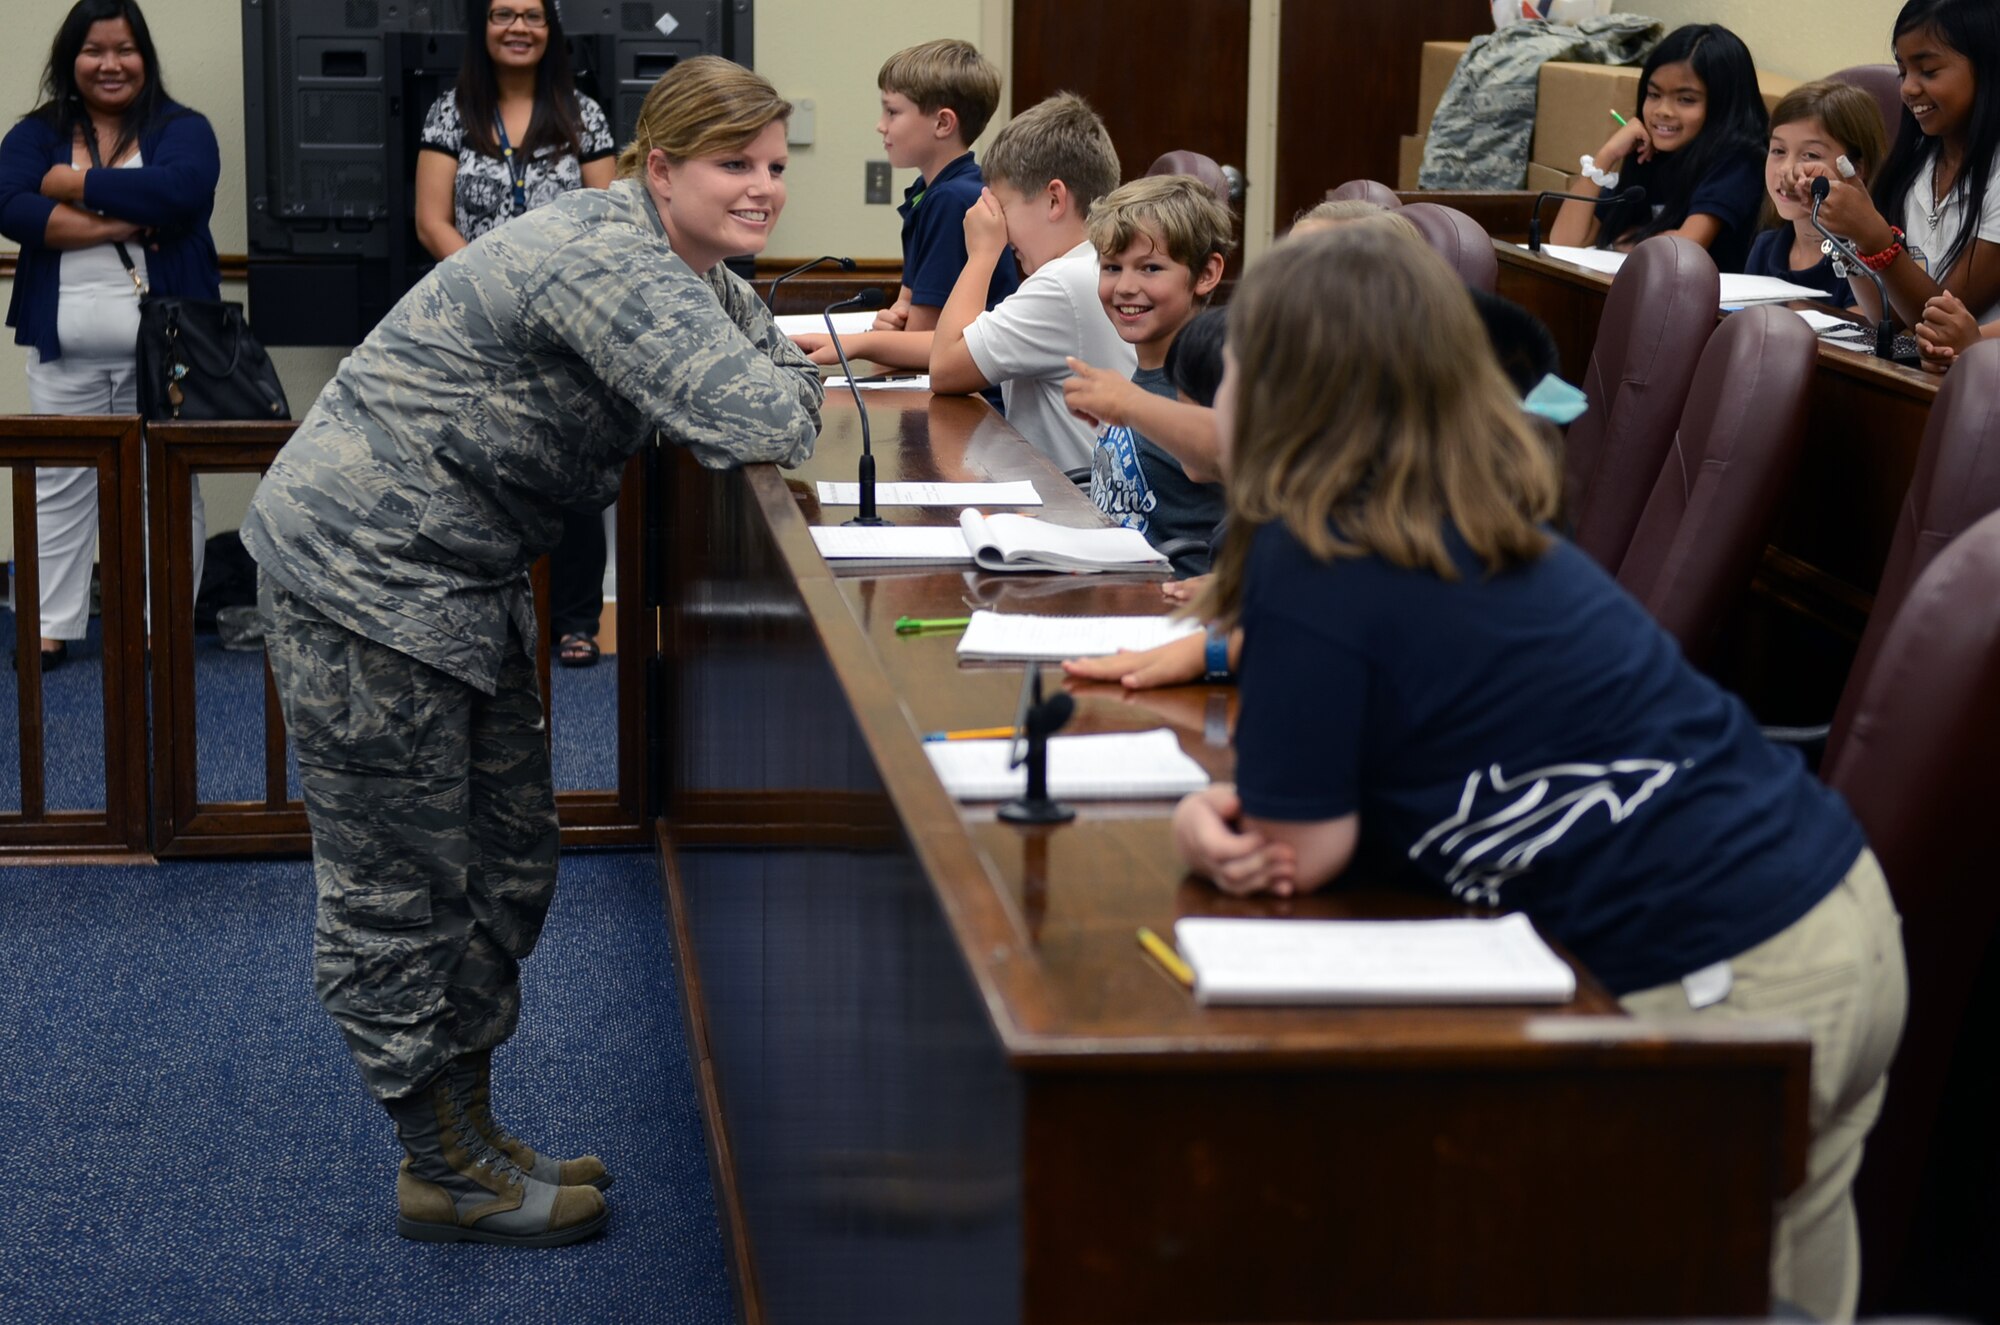 Capt. Natalie Cepak, 36th Wing officer in charge of civil law, discusses the mock trial’s deliberation with Andersen Elementary School fourth graders in the base courtroom May 1, 2015, at Andersen Air Force Base, Guam. The 36th Wing Paralegal team acted out an Alice in Wonderland-themed mock trial for Law Day, May 1, to explain the importance of the Magna Carta. (U.S. Air Force photo by Airman 1st Class Alexa Ann Henderson/Released)